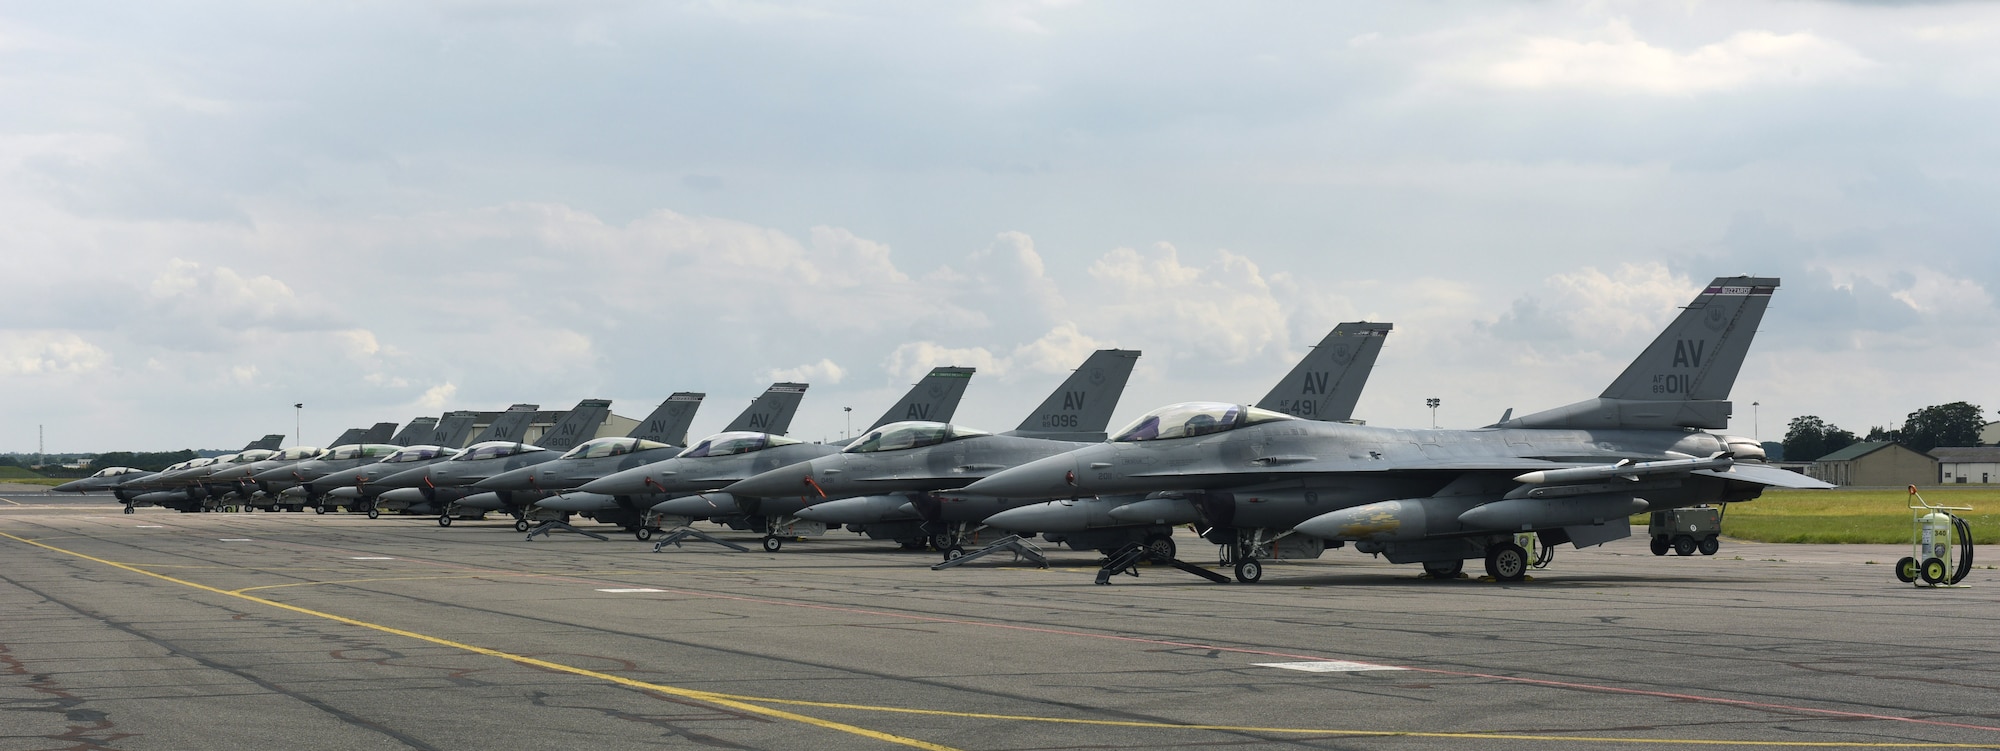 U.S. Air Force F-16 Fighting Falcon aircraft assigned to the 31st Fighter Wing, Aviano Air Base, Italy, sit on the flightline at Royal Air Force Mildenhall, England, Aug. 3, 2021. The F-16 is a compact, multi-role aircraft which is maneuverable and has proven itself in air-to-air combat and air-to-surface attack. (U.S. Air Force photo by Karen Abeyasekere)